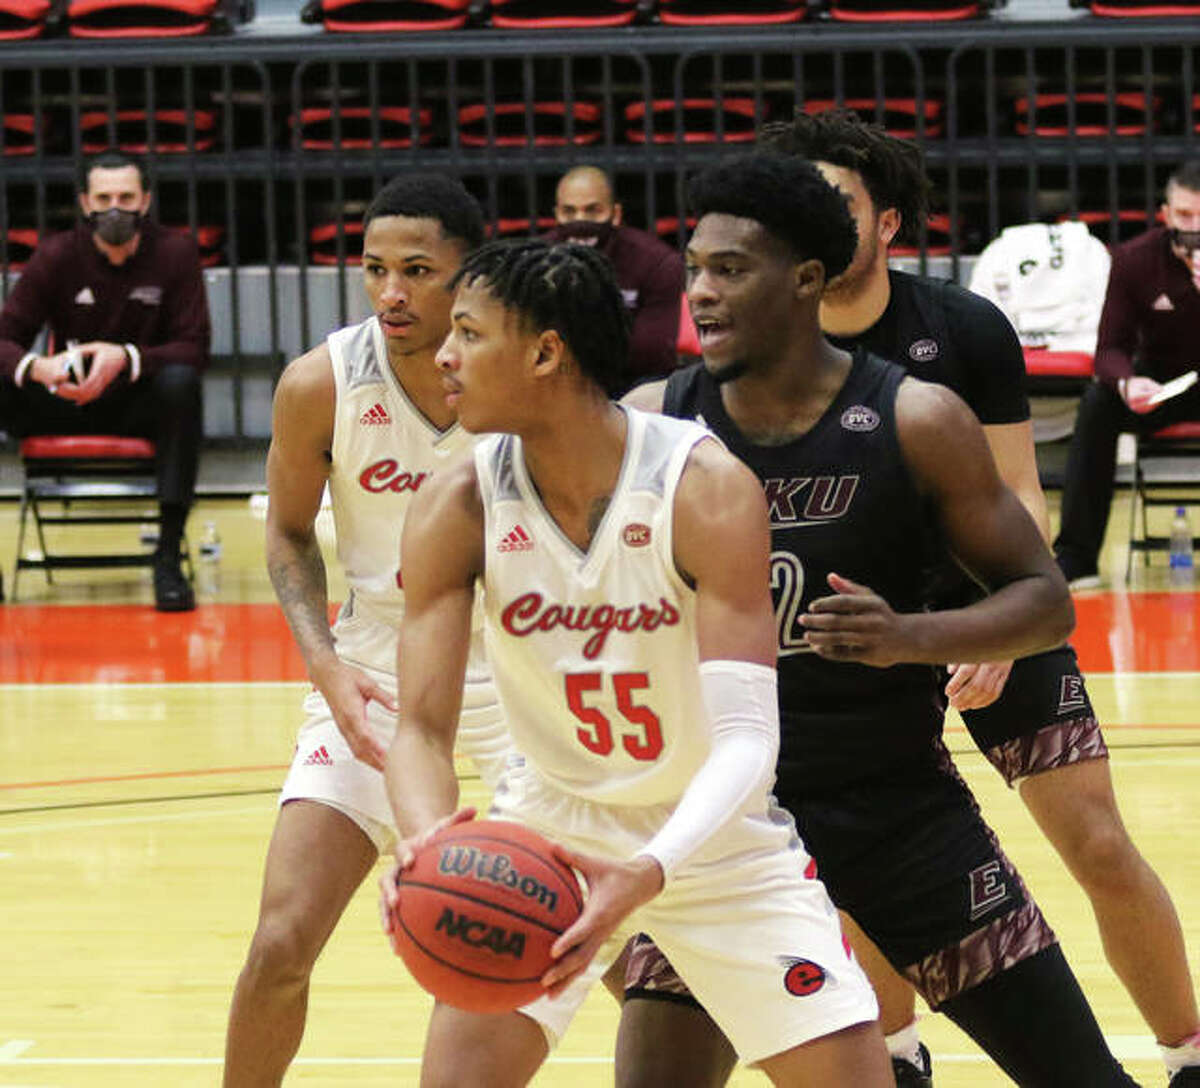 SIUE’s Lamar Wright (55) looks for a teammate in front of his twin Shamar Wright (left) during a OVC men’s basketball game against Eastern Kentucky last season at First Community Arena in Edwardsville.